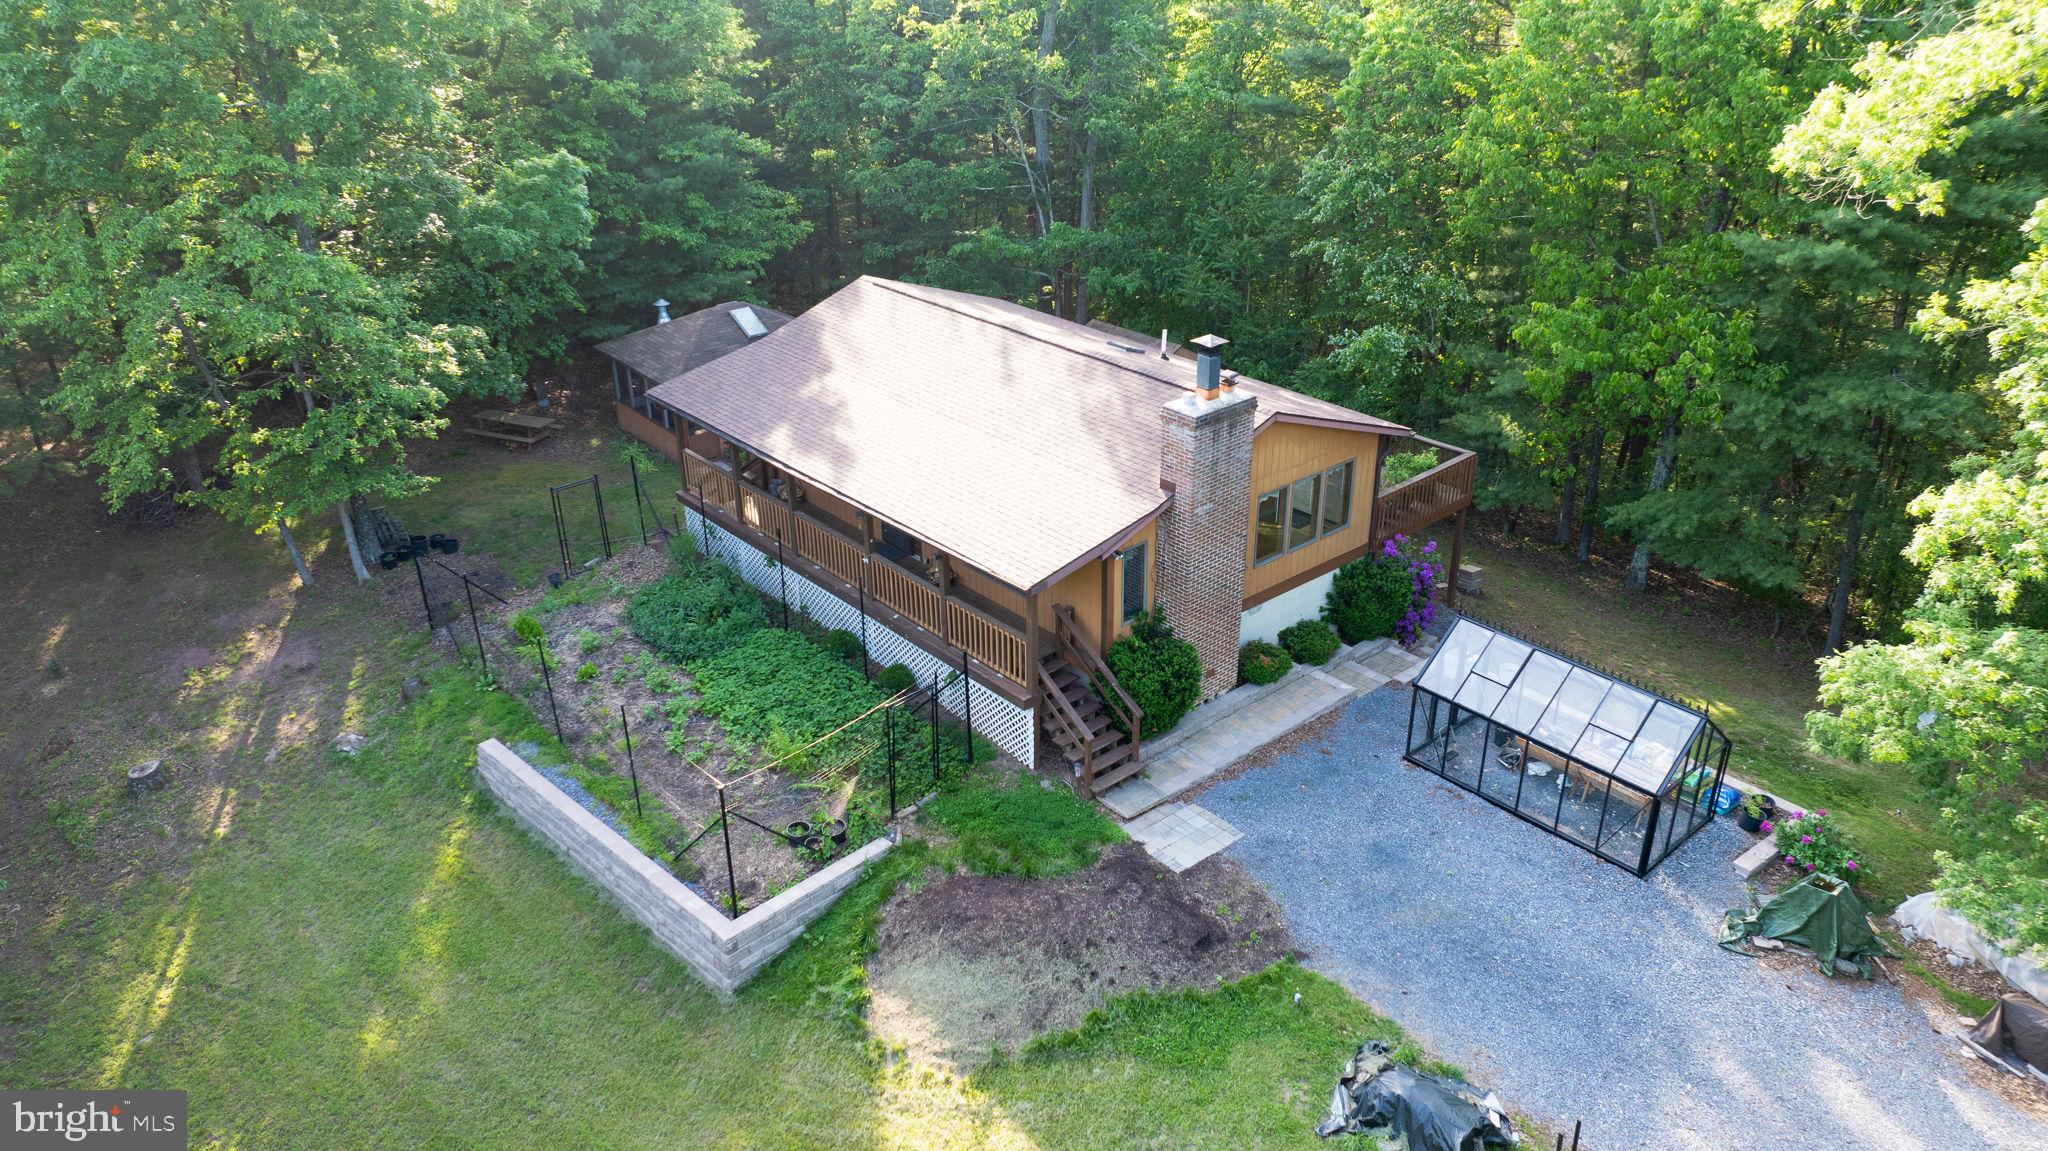 an aerial view of a house with a yard large tree and a yard